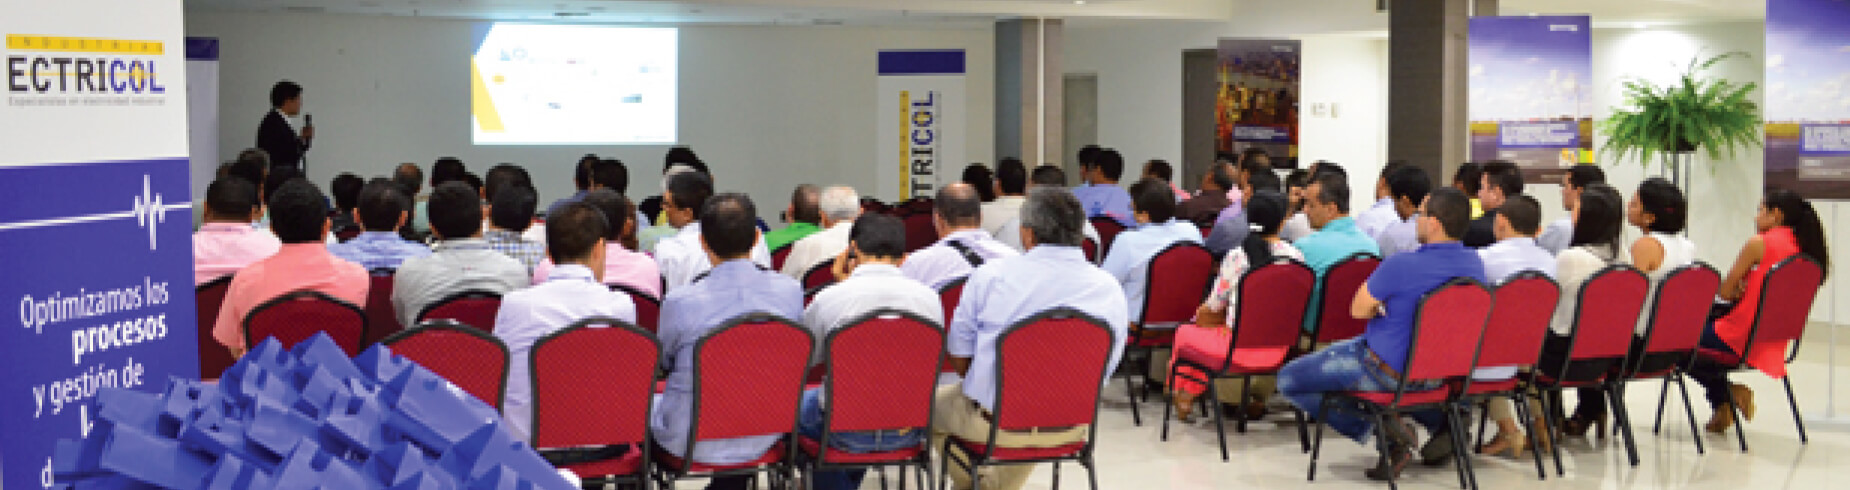 Ectricol presents its portfolio of products and services in Barranquilla